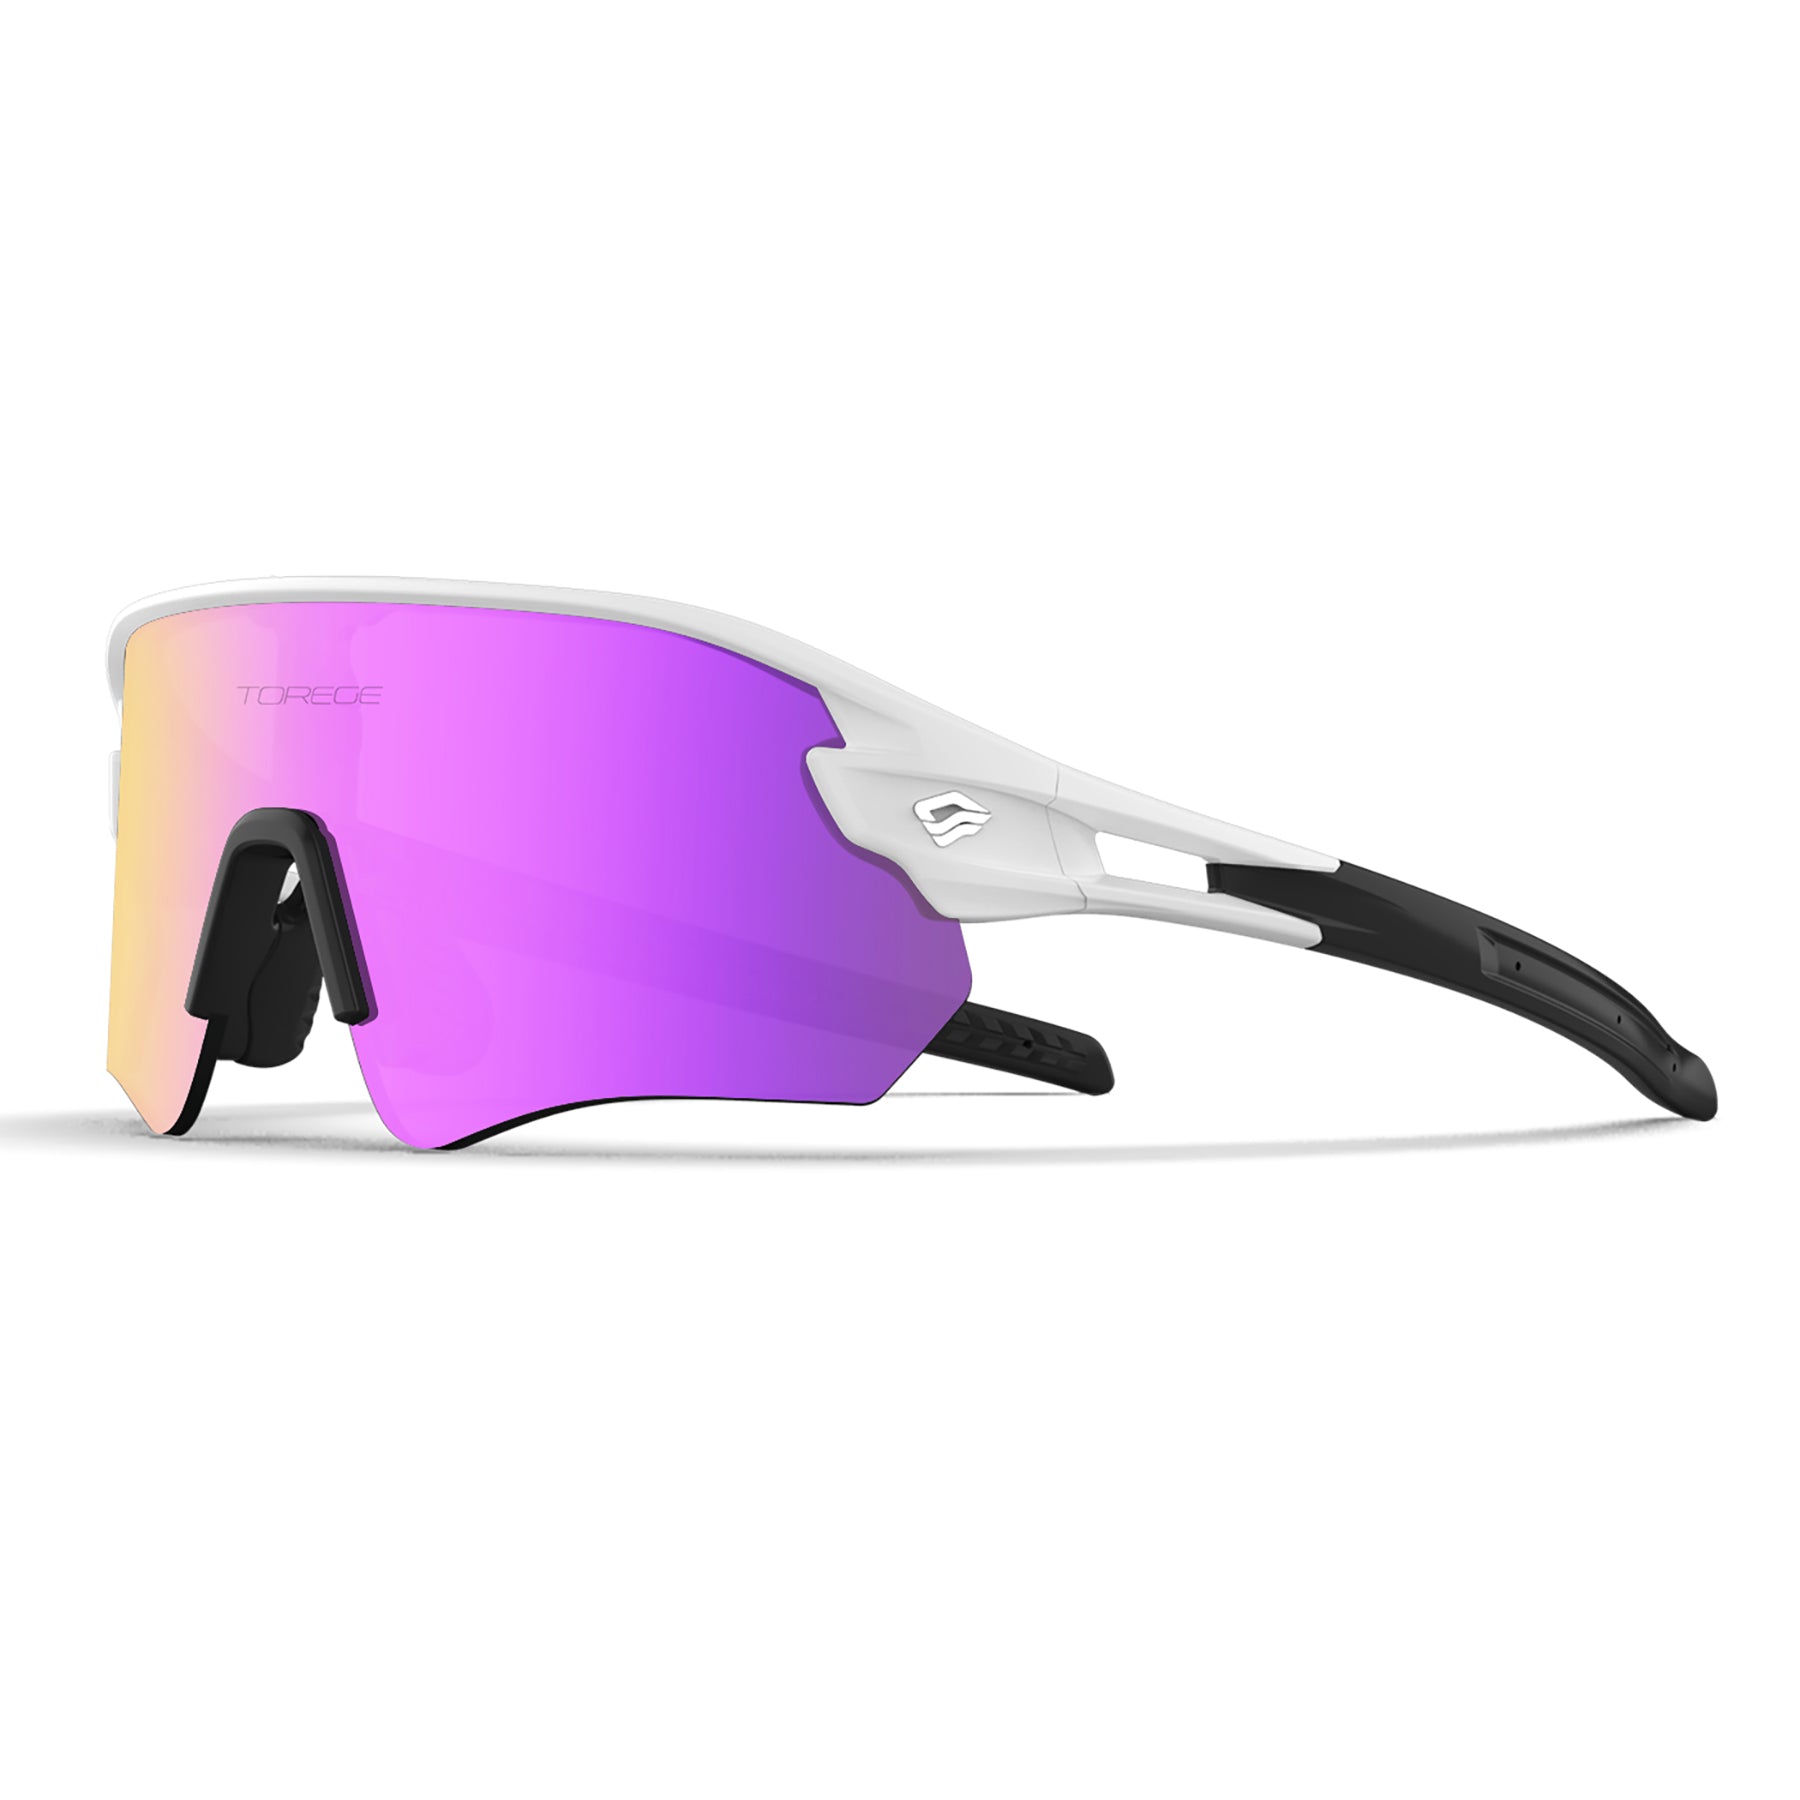 NeonGaze Ultra Lightweight Sports Sunglasses for Men & Women with Lifetime Warranty - Ideal for Cycling, Hiking, Fishing, Golf & Running - White Frame